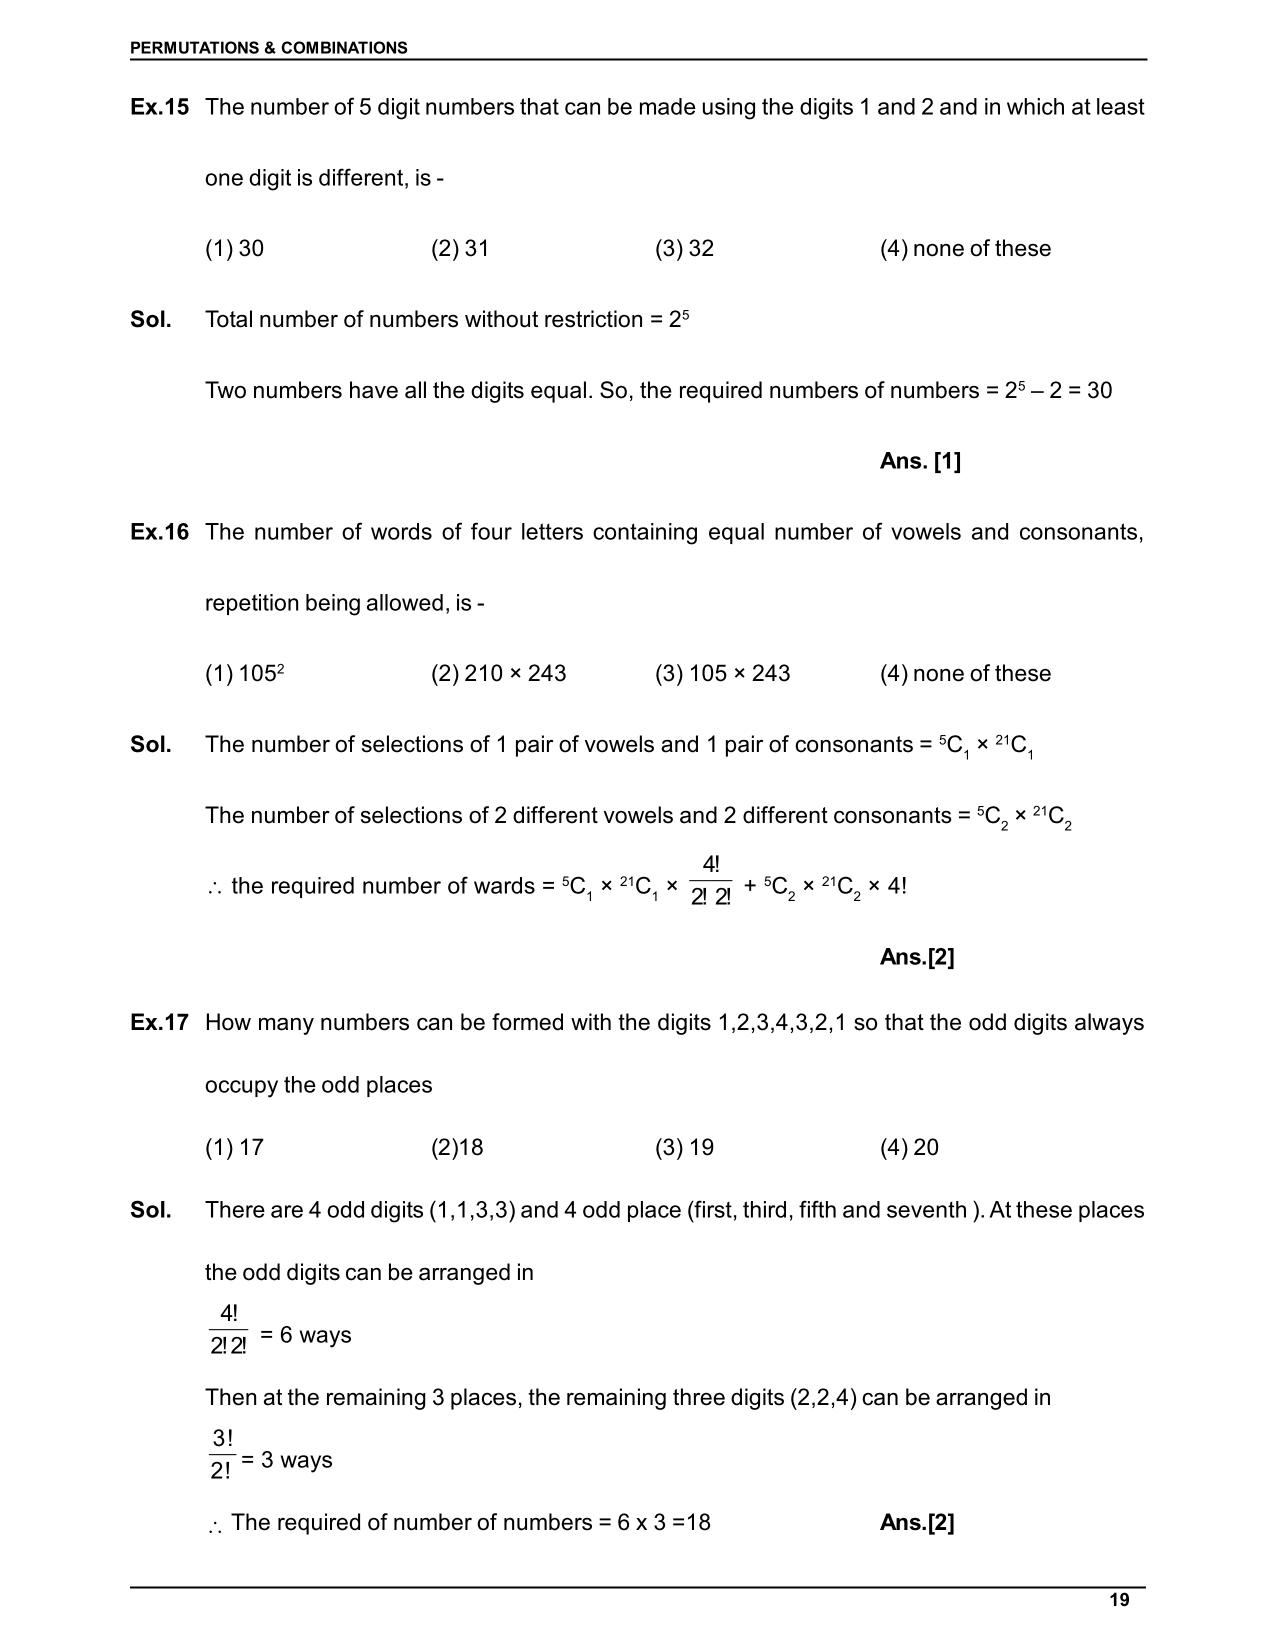 Permutations and Combinations Class 11 Notes - Solved Examples